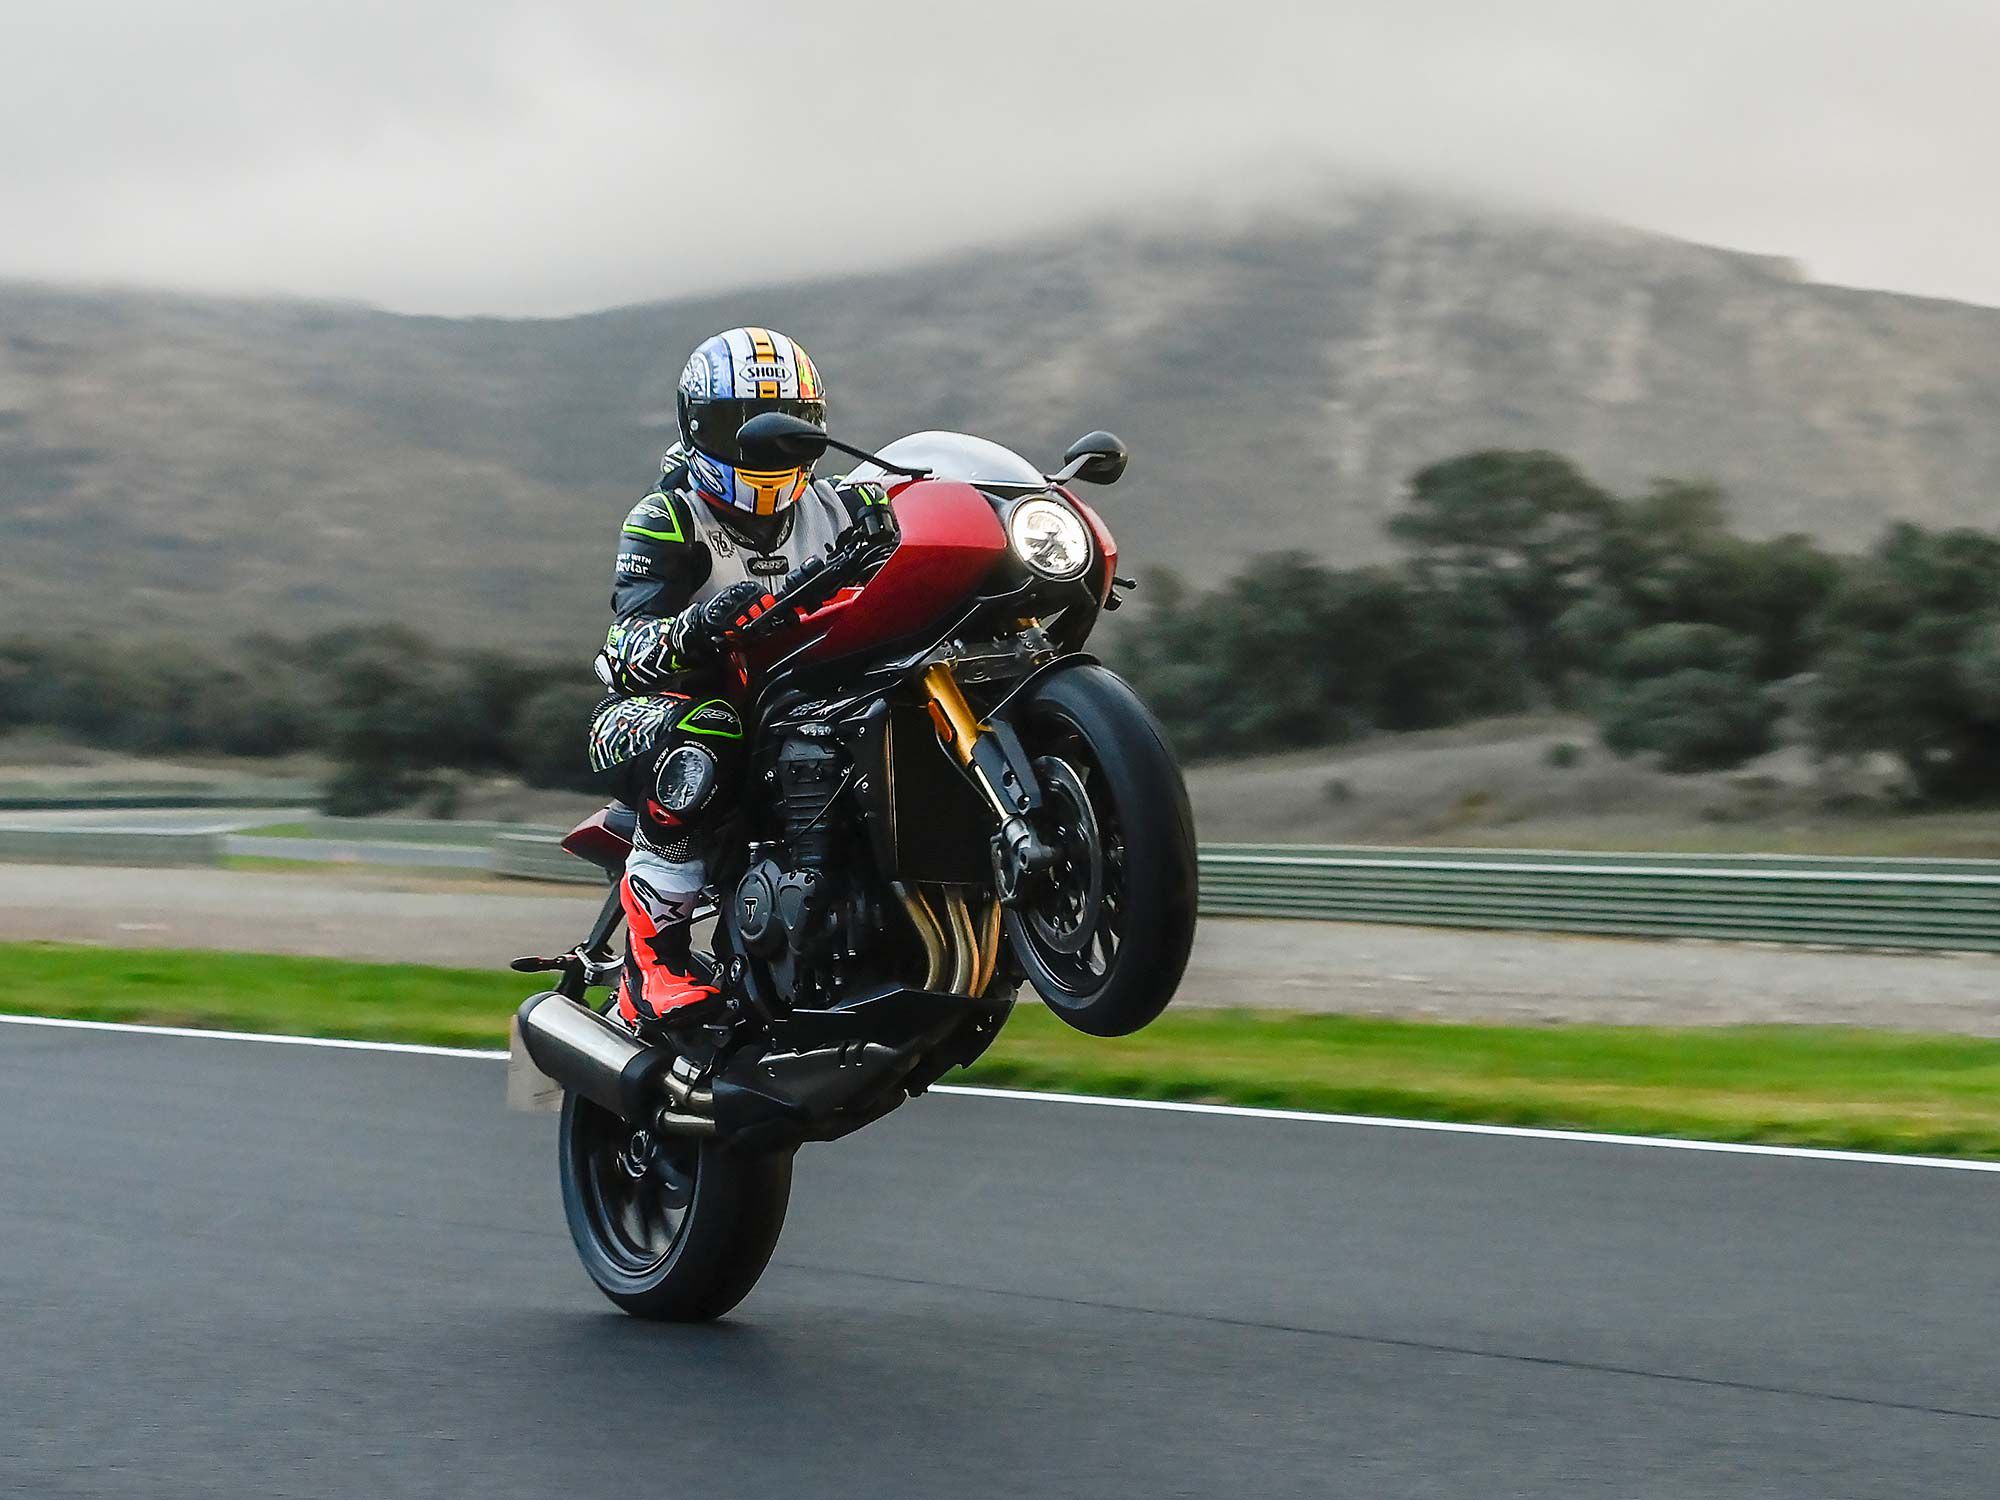 Unchanged from the 1200 RS with the same peak power of 178 hp, and peak torque at 92 pound-feet.